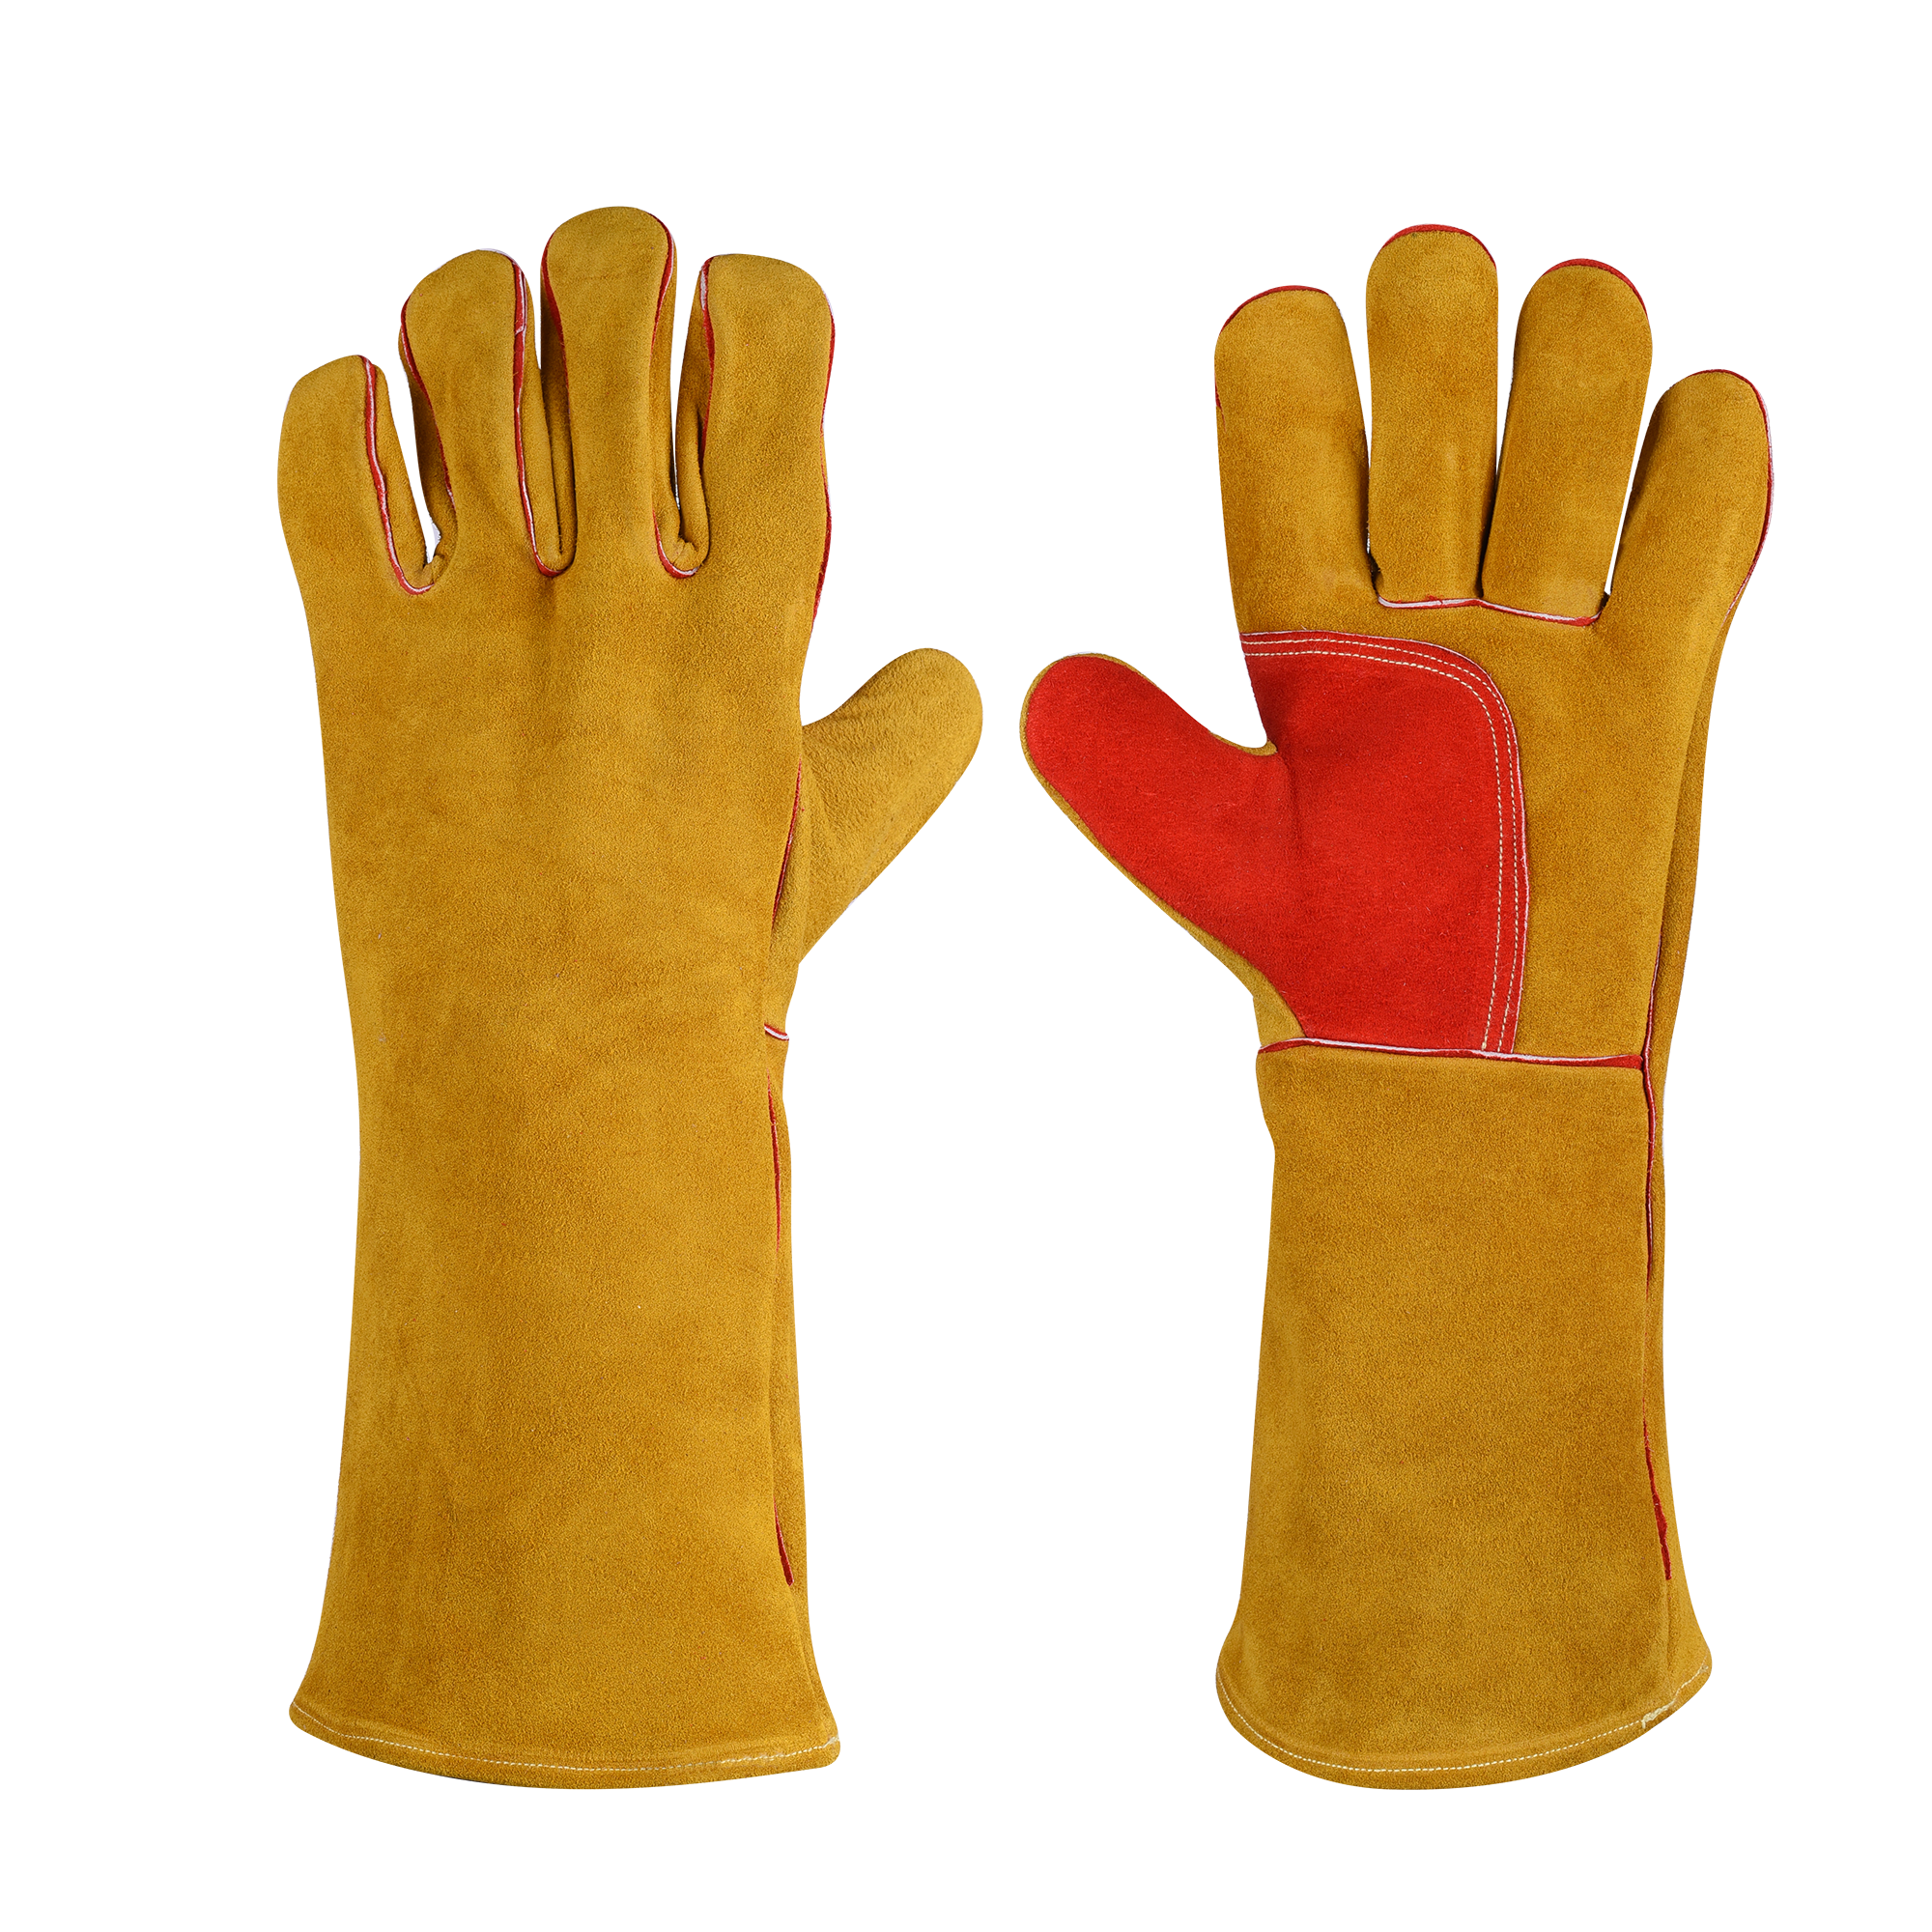 High quality cowhide split leather double palm stick welding gloves large size 16 inch long, sewed with kevlar thread